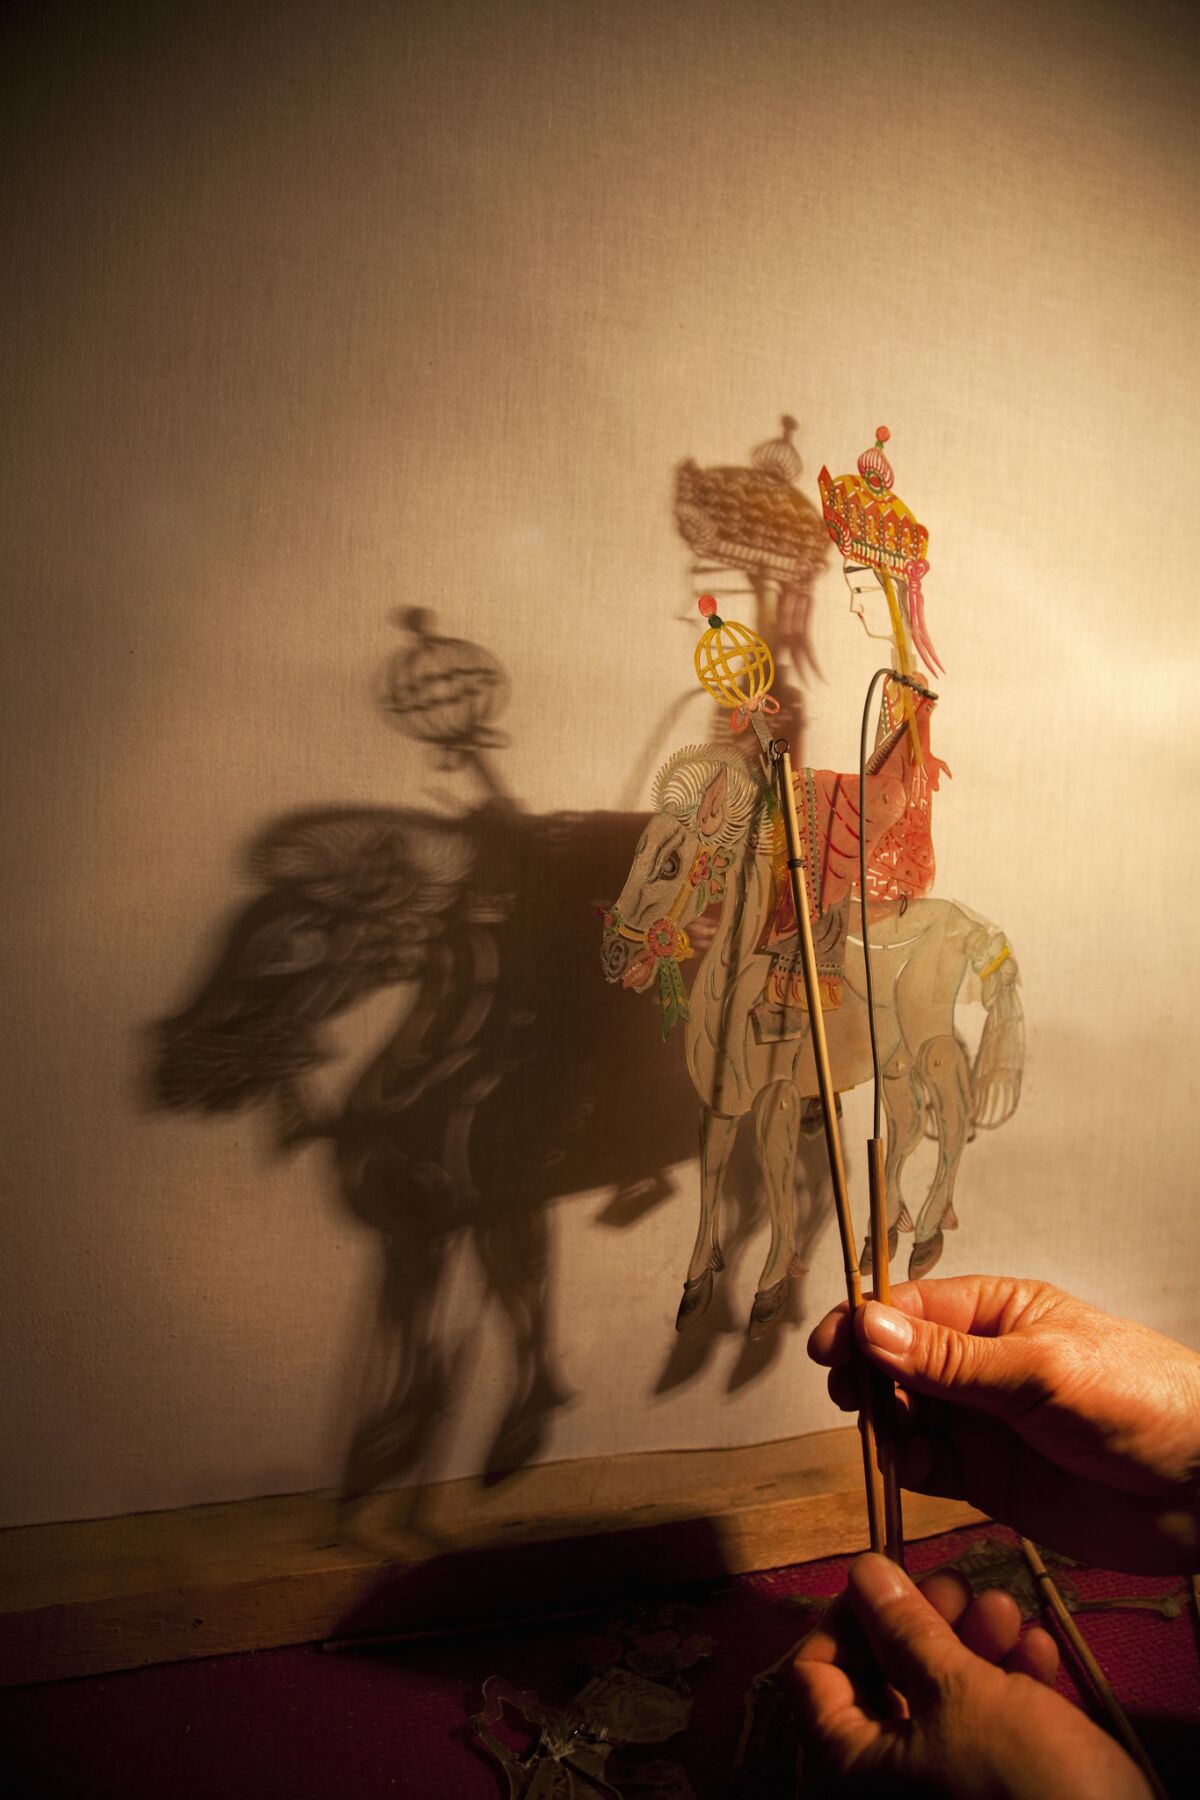 Shadow puppetry was once China's most popular form of entertainment.